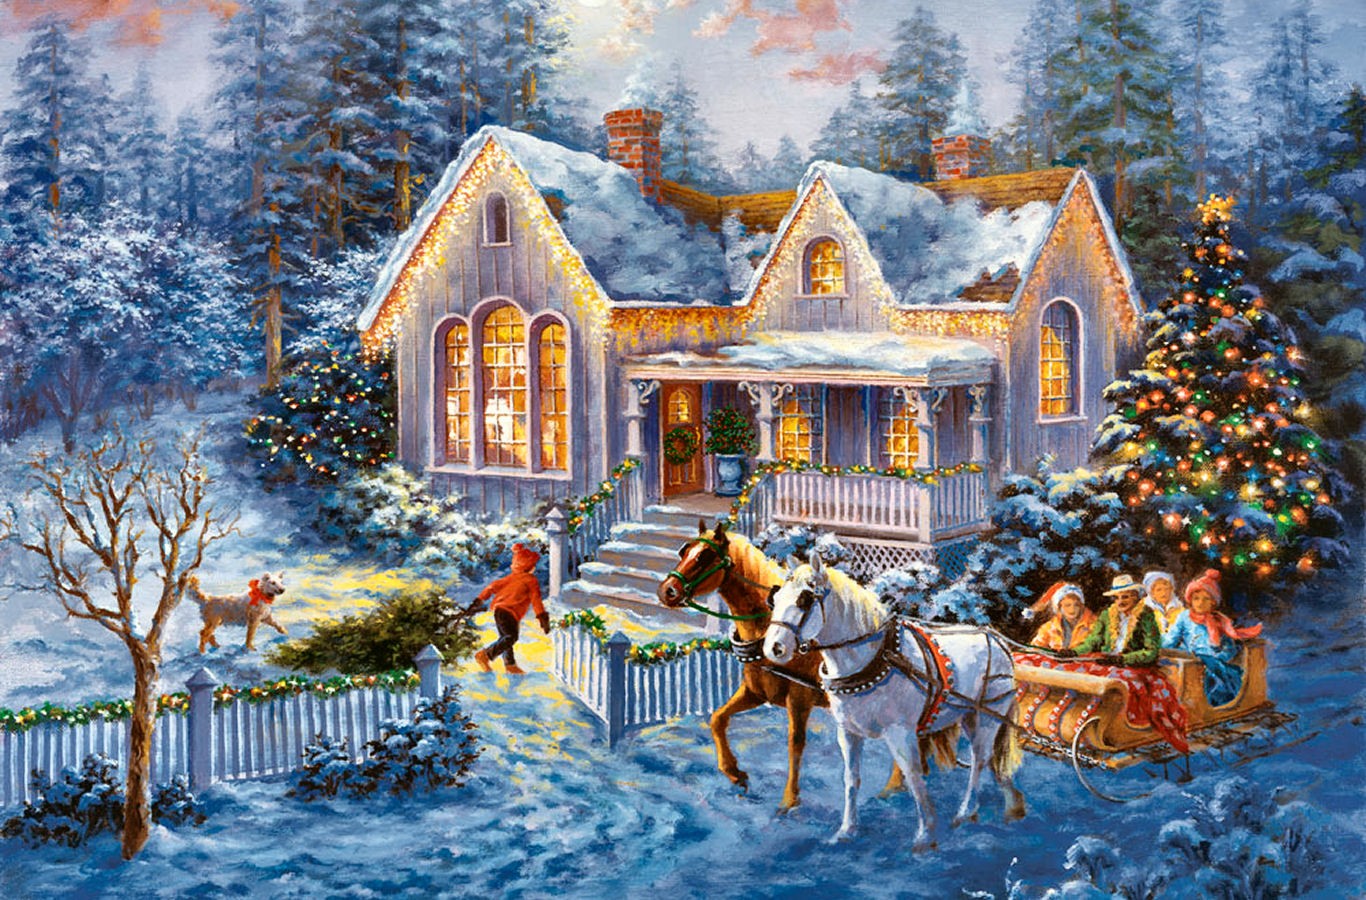 winter-home-welcome-painting-holiday-artwork-illustration-scenery-december-art-sleigh-occasion-christmas-snow-wallpaper-iphone-6.jpg